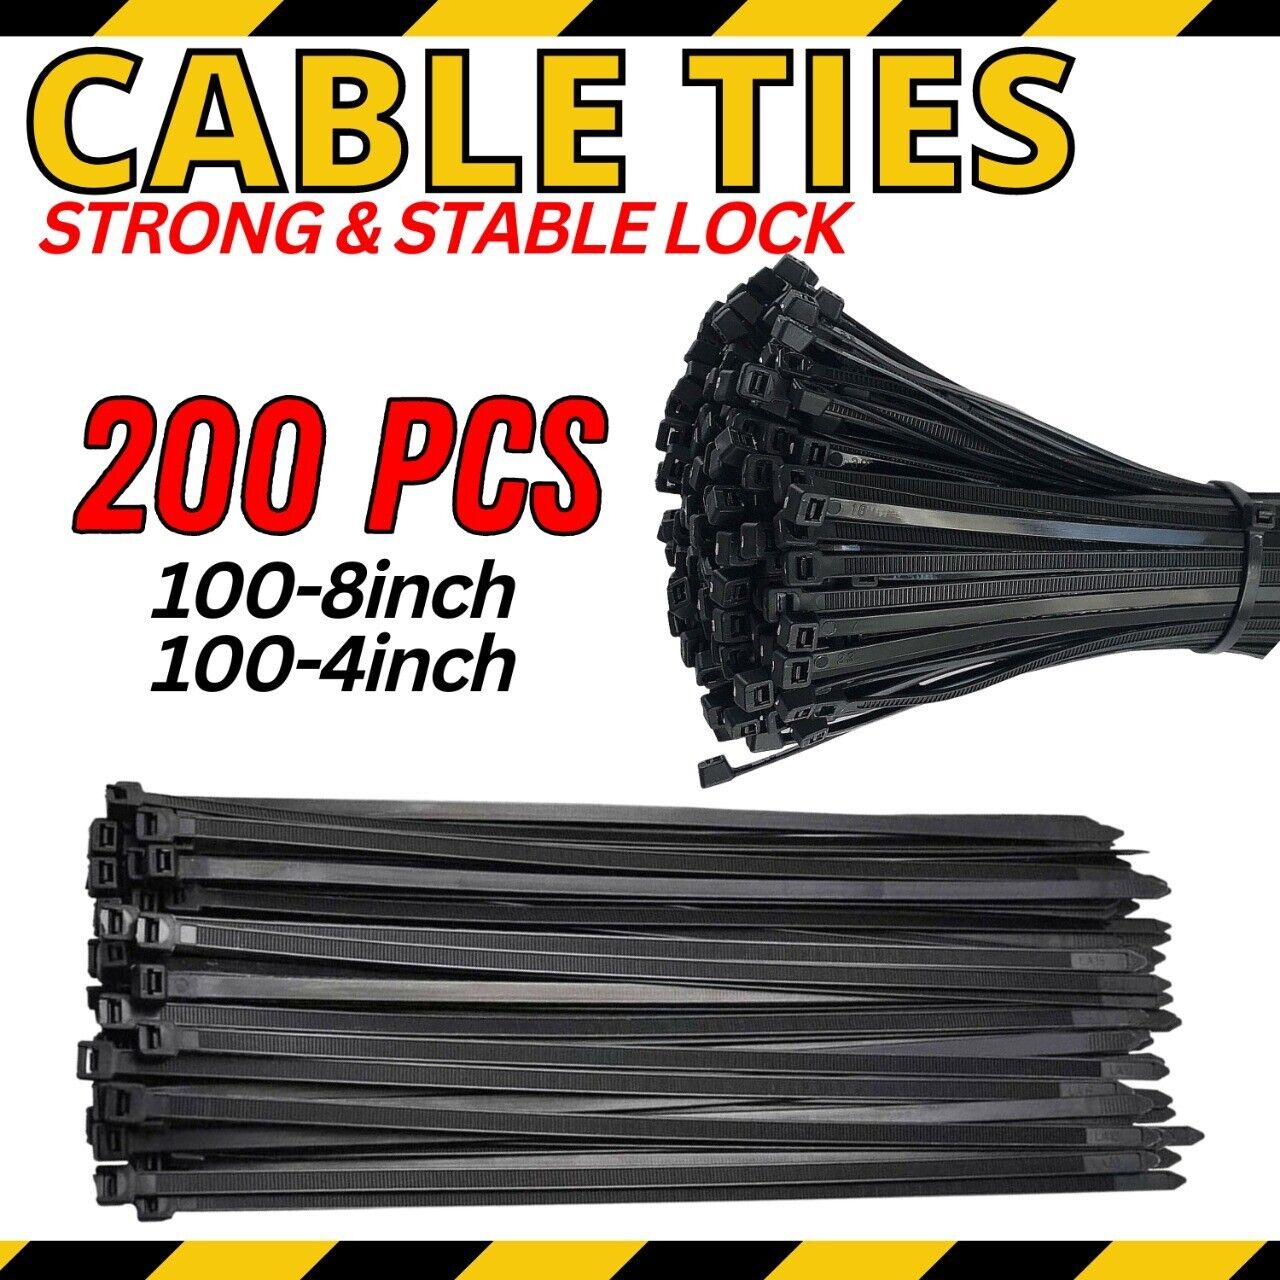 200PCS Cable Ties Zip Nylon Black Nylon Wire Wrap Tie UV Weather Resistant Small to Medium Zip Tie, Nylon PA66 UV Resistant Cable Tie for Indoor and Outdoor Use - Ideal for bundling and securing objects